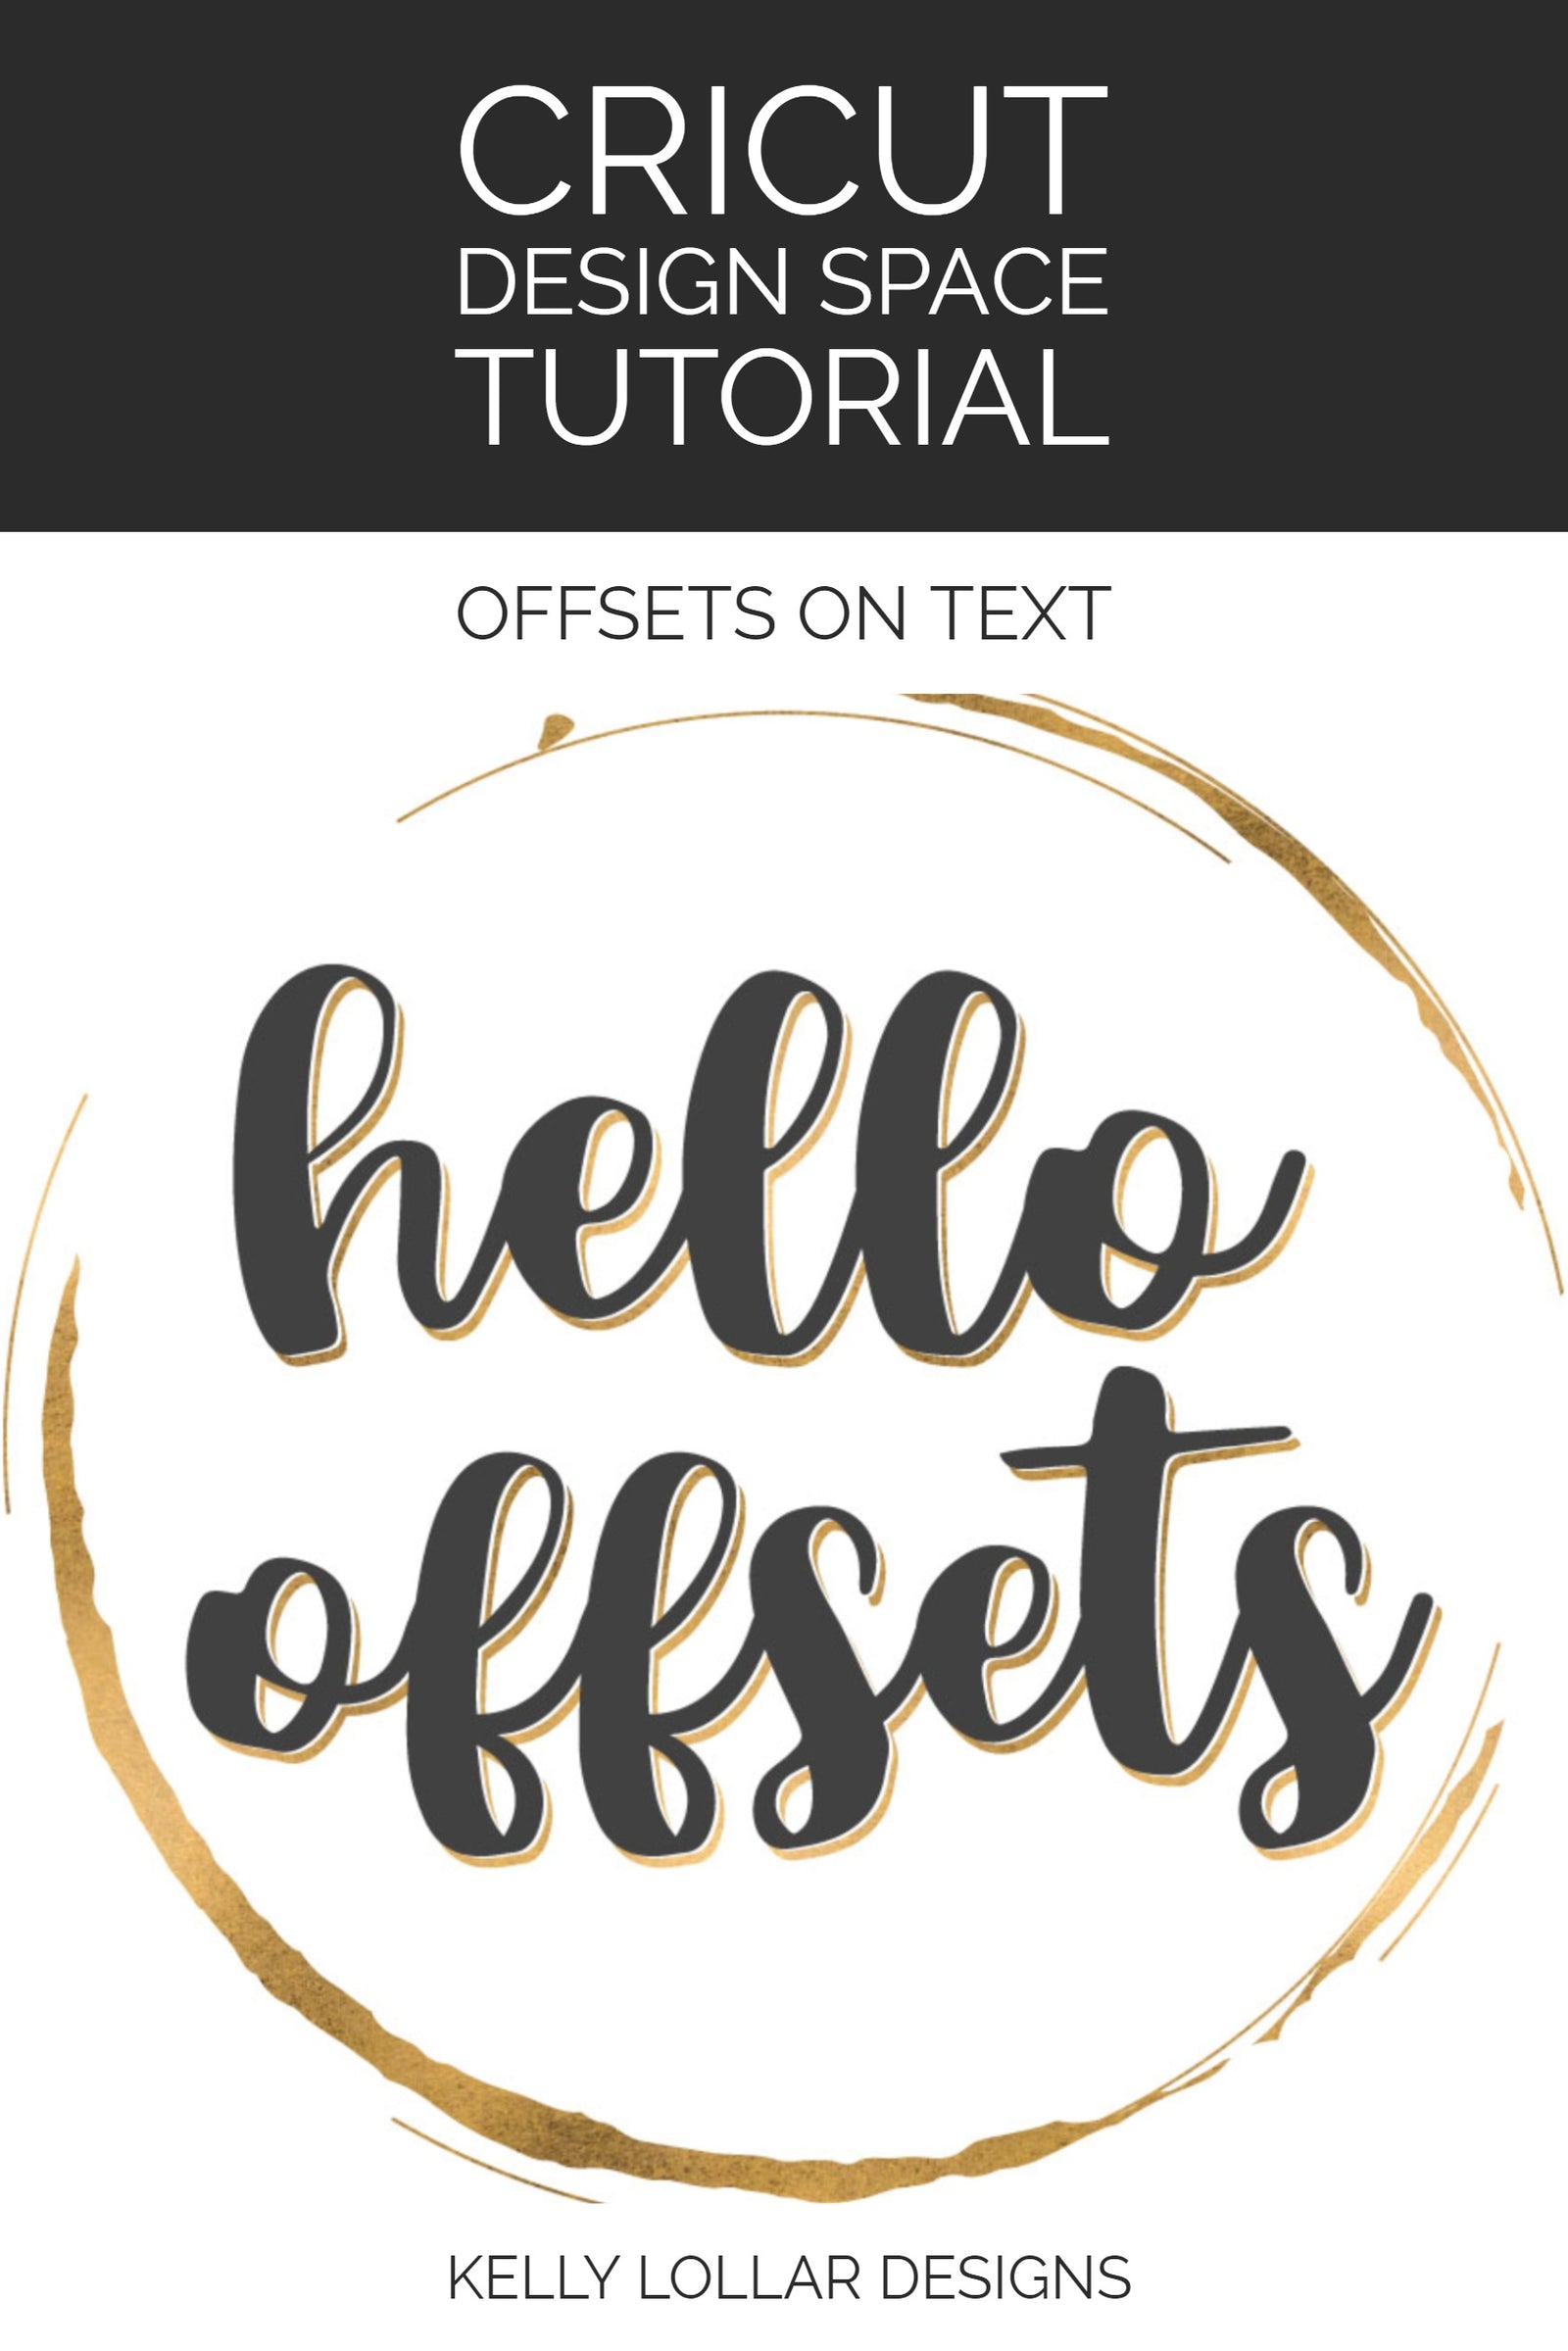 Cricut Design Space Tutorial Creating Offsets On Text